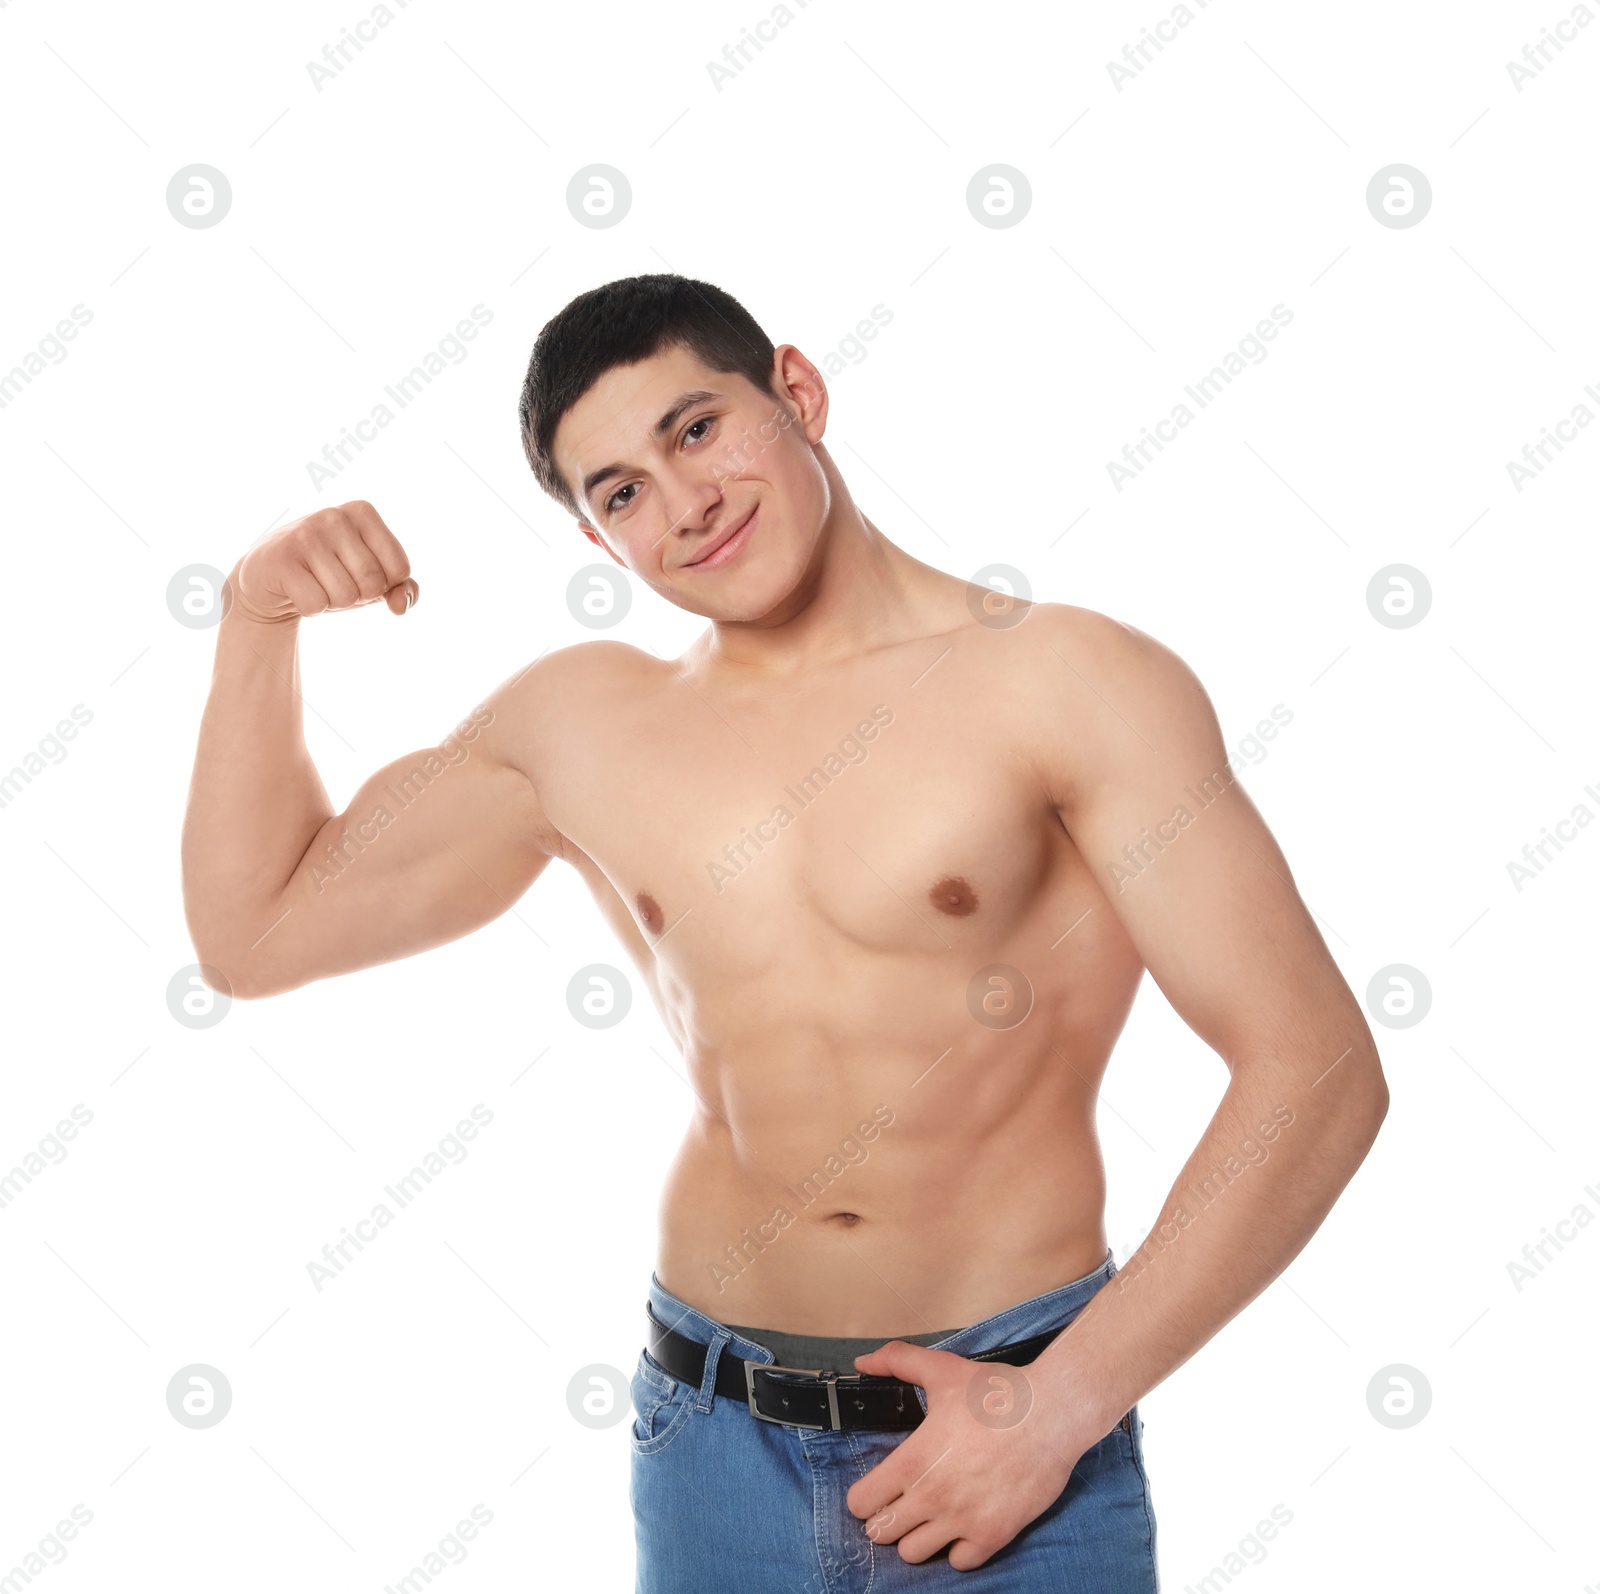 Photo of Portrait of shirtless muscular man showing bicep on white background